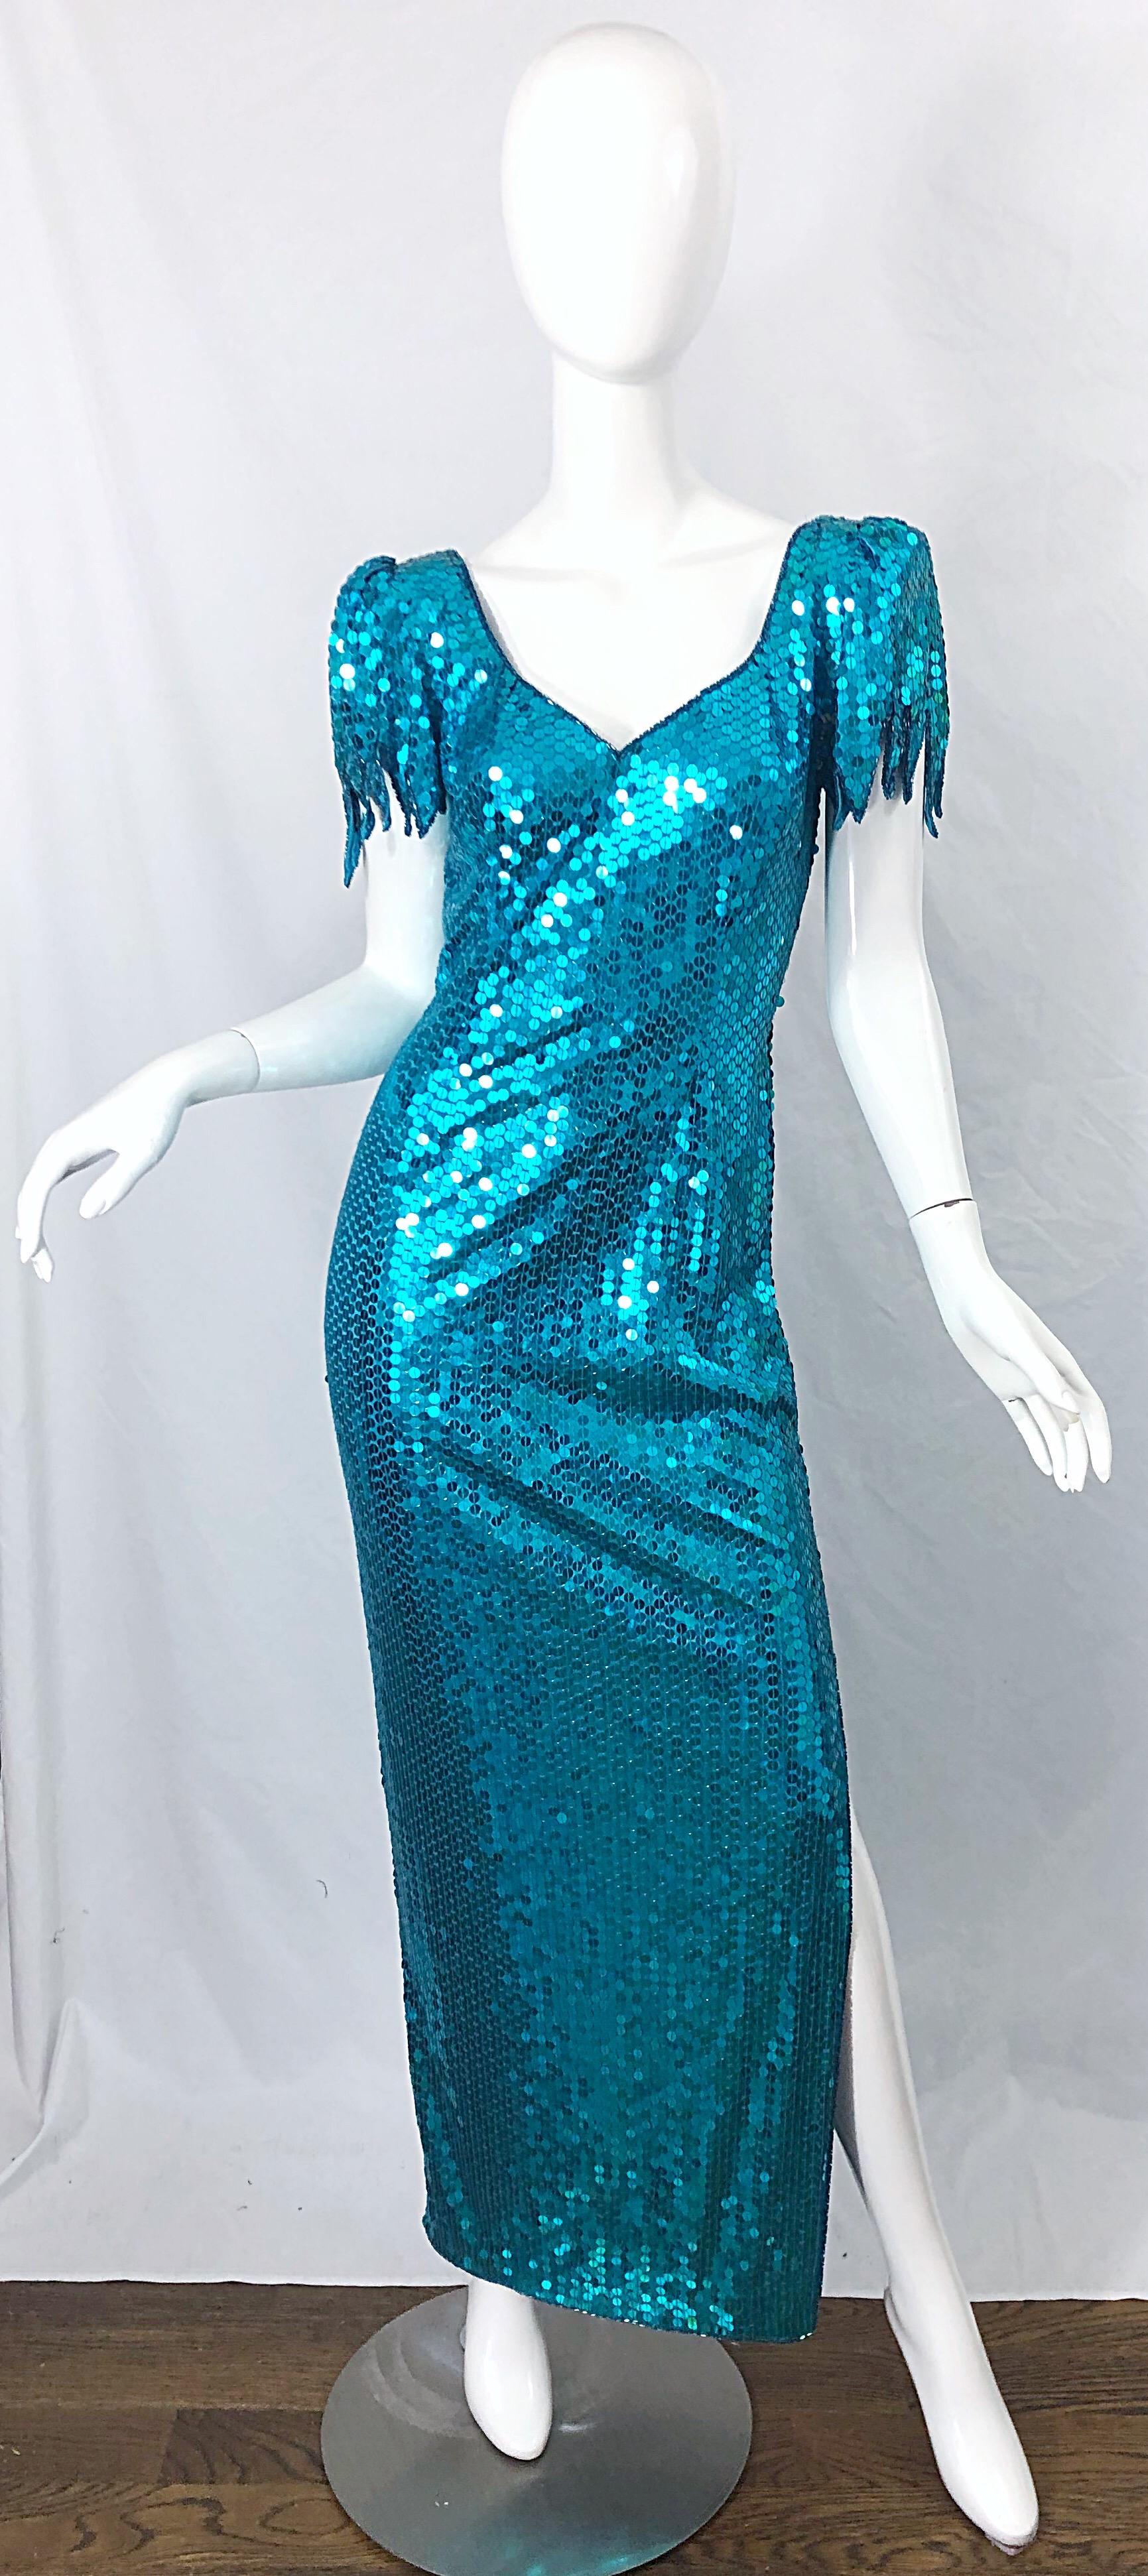 Avant Garde TED LAPIDUS turquoise blue fully sequined evening gown dress ! Features thousands of hand-sewn sequins throughout the entire dress. Hundreds of seed beads align the collar. Scalloped sleeve cuffs. Slit up the left side of the leg reveals